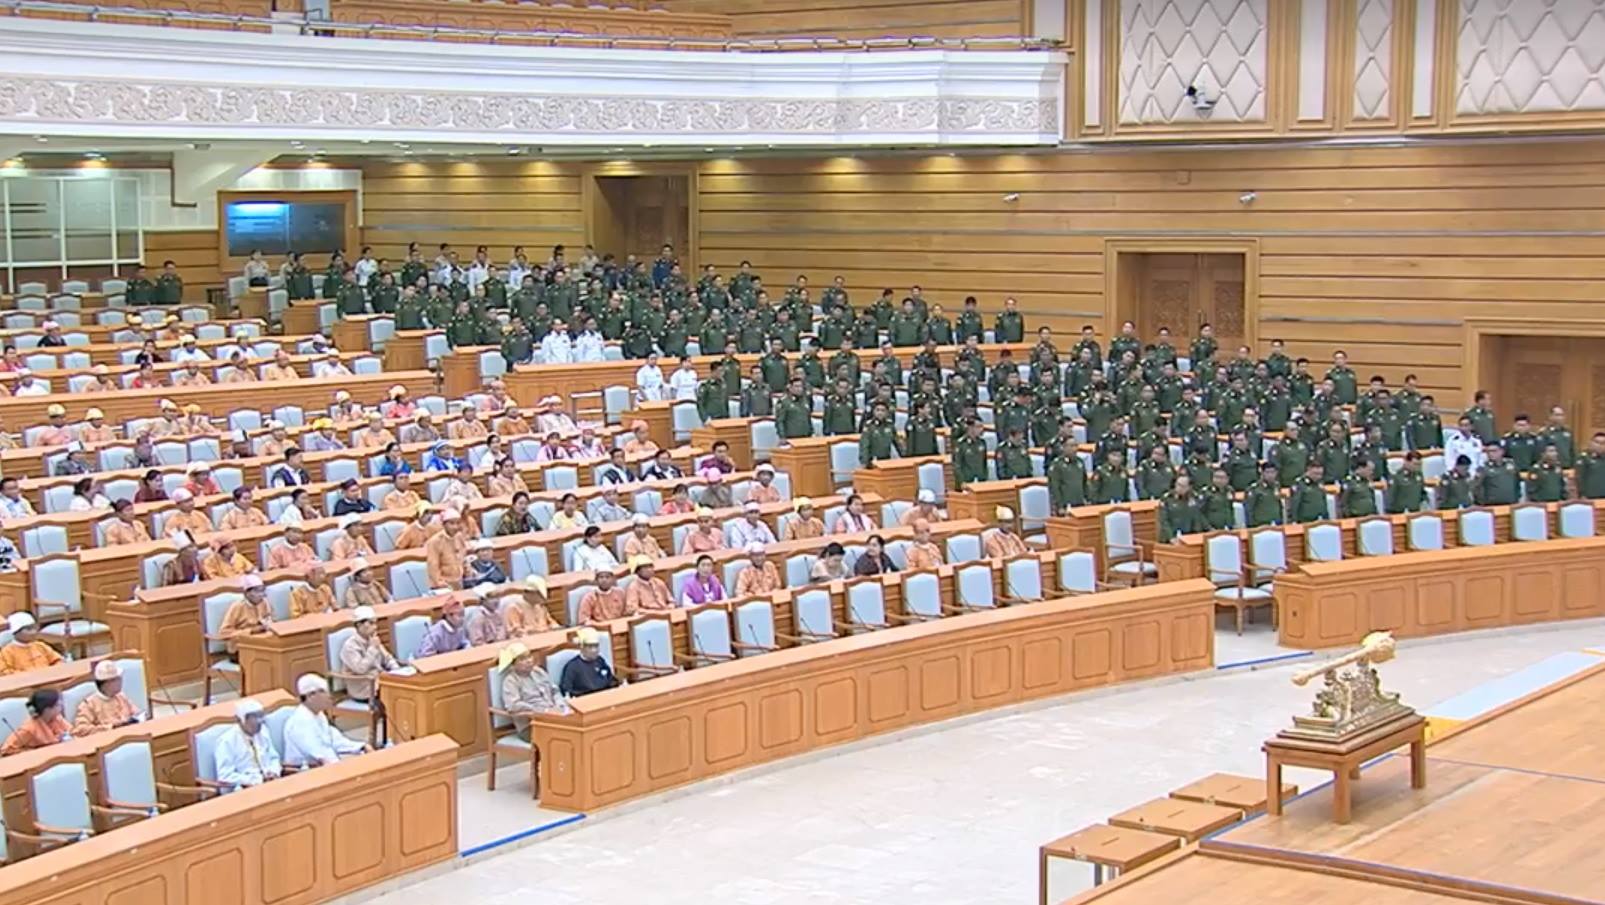 Myanmar military MPs boycott vote on motion to discuss constitutional review committee – via Mizzima TV screenshot.